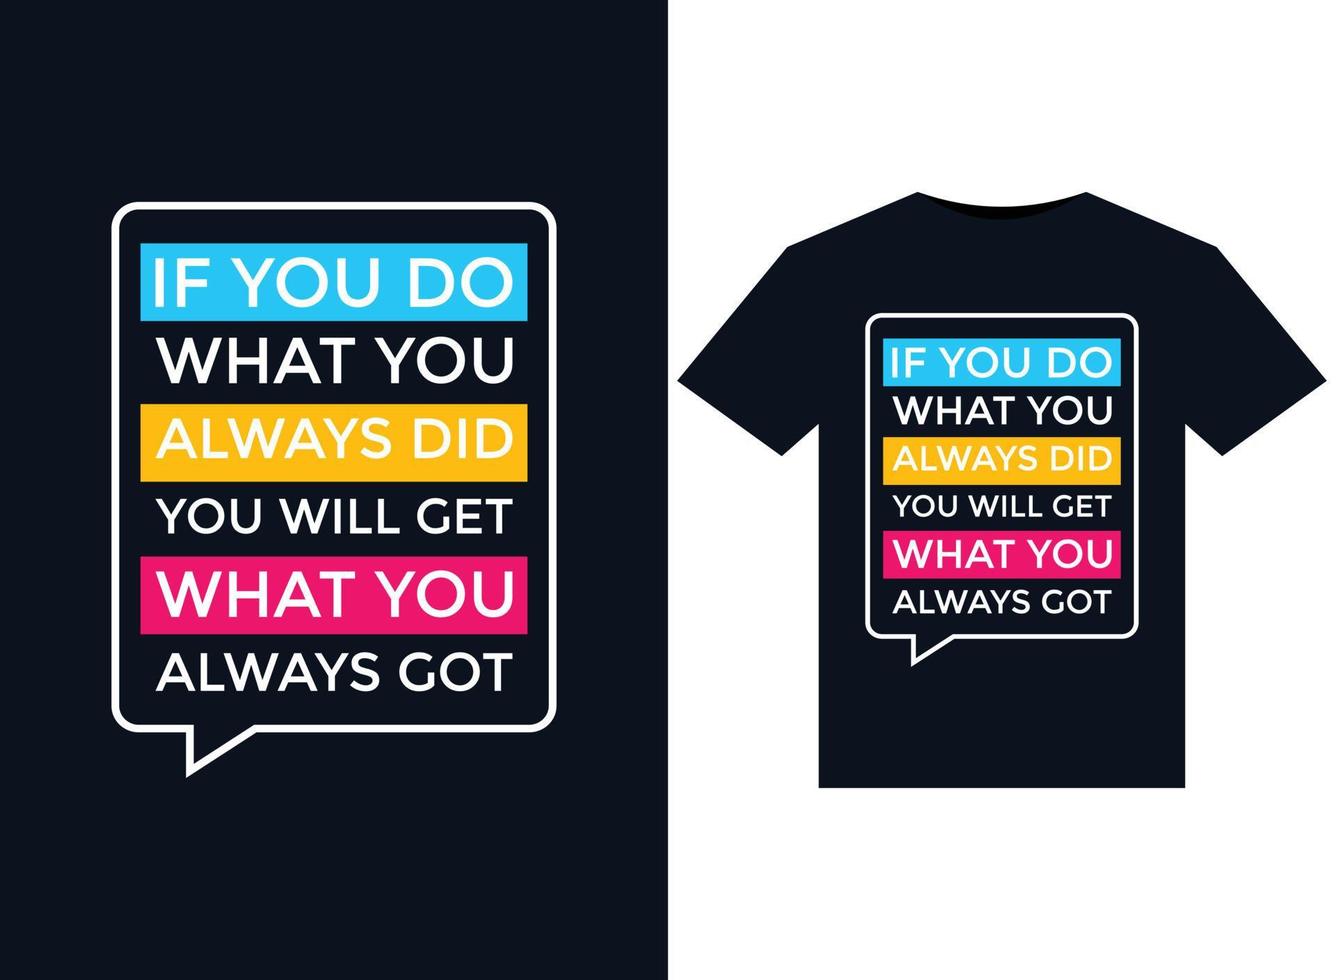 If you do what you always did you will get what you always got illustrations for the print-ready T-Shirts design vector